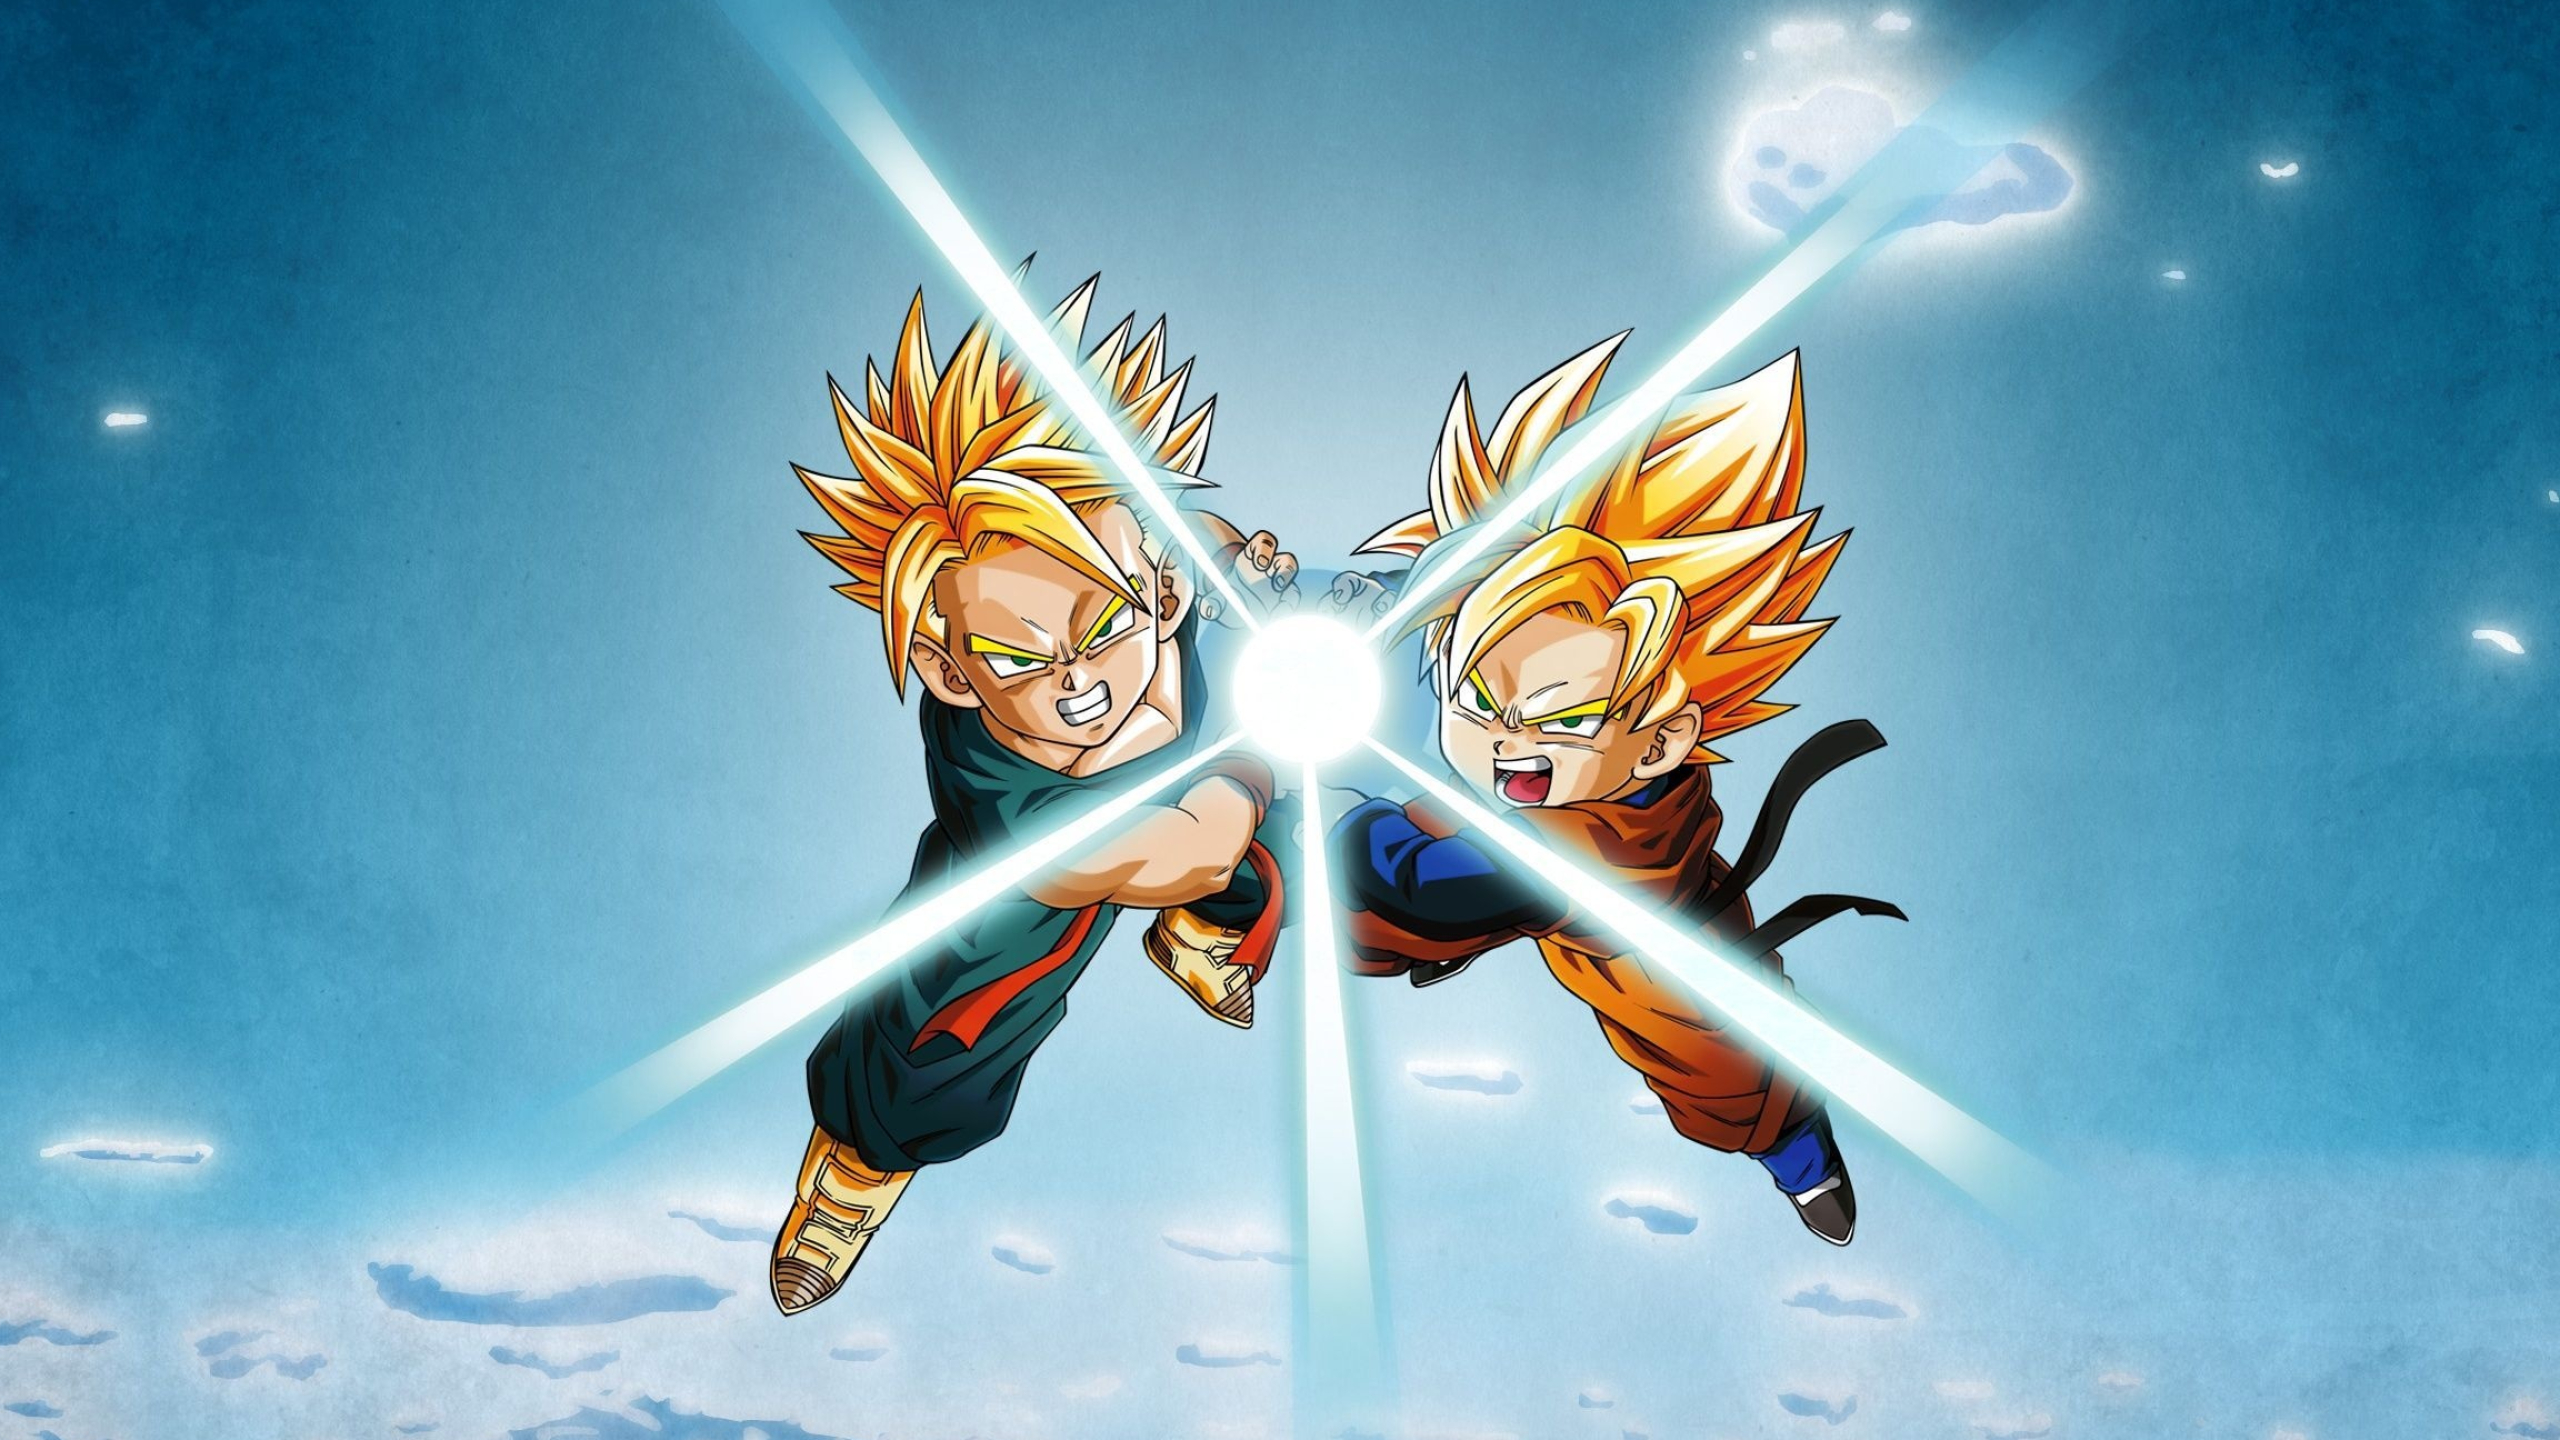 Goten: DBZ, A Japanese anime television series produced by Toei Animation, 1989-1996. 2560x1440 HD Wallpaper.